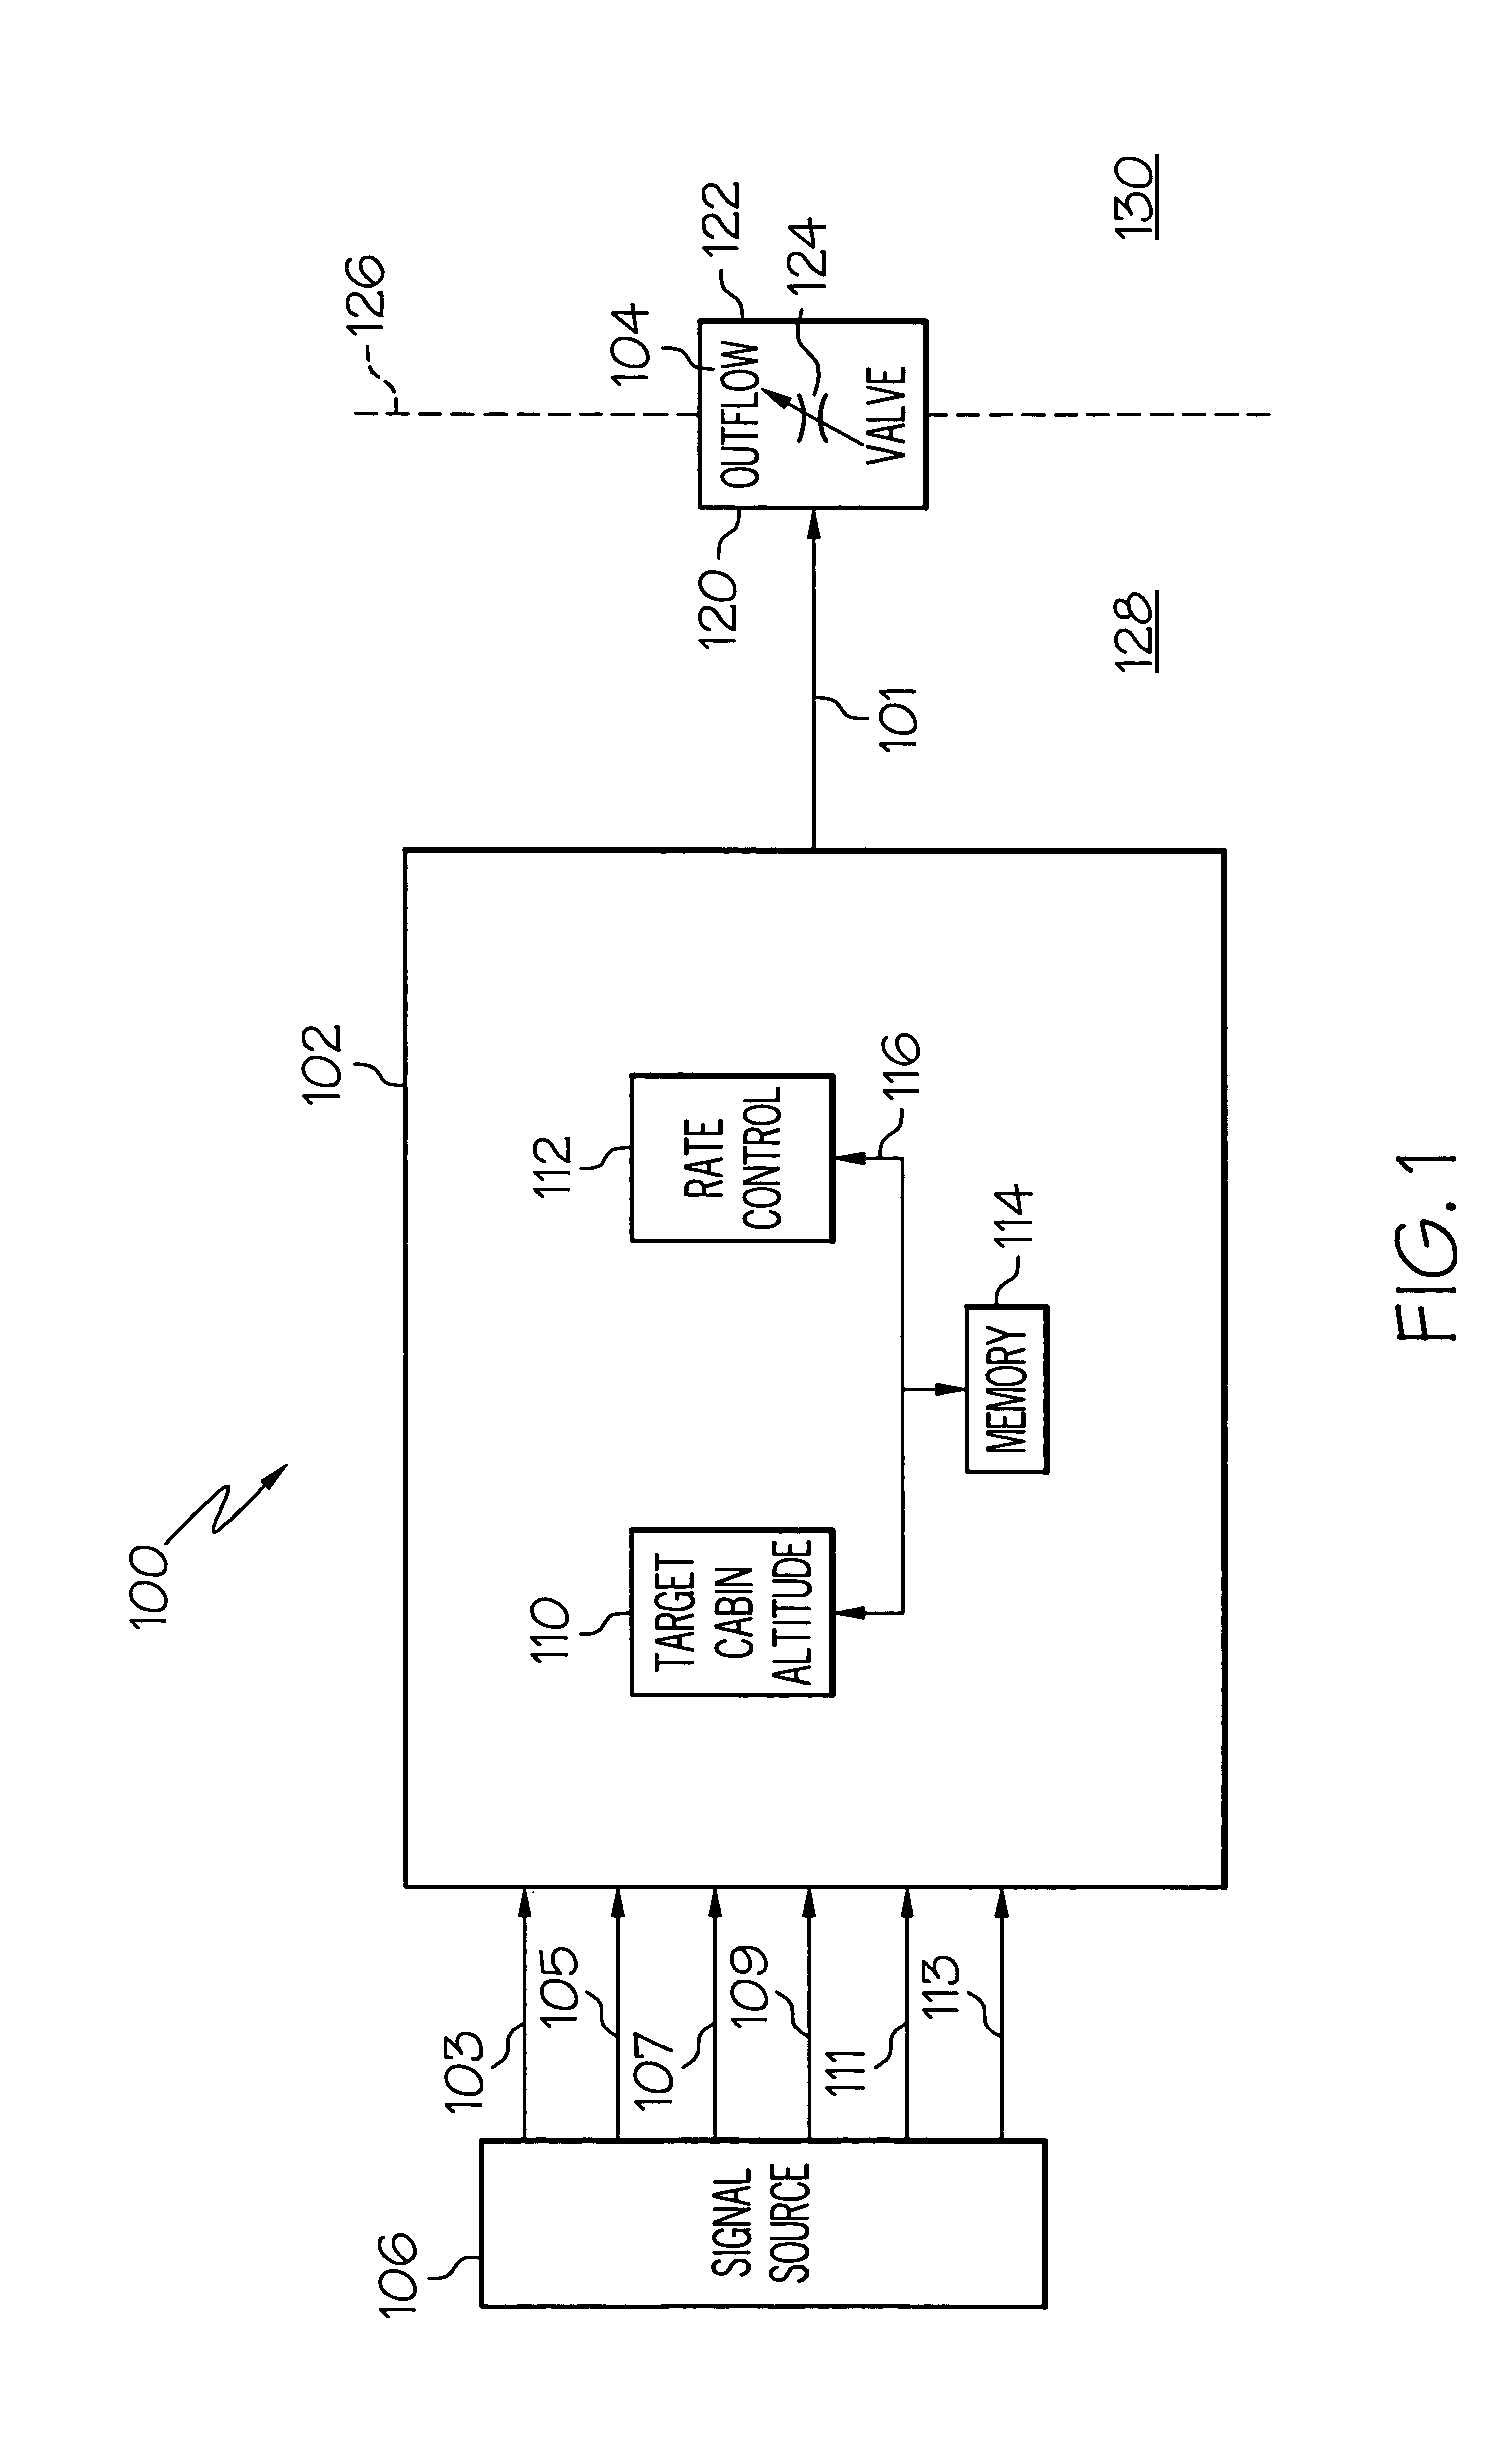 Cabin pressure control system and method that accommodates aircraft take-off with and without a cabin pressurization source